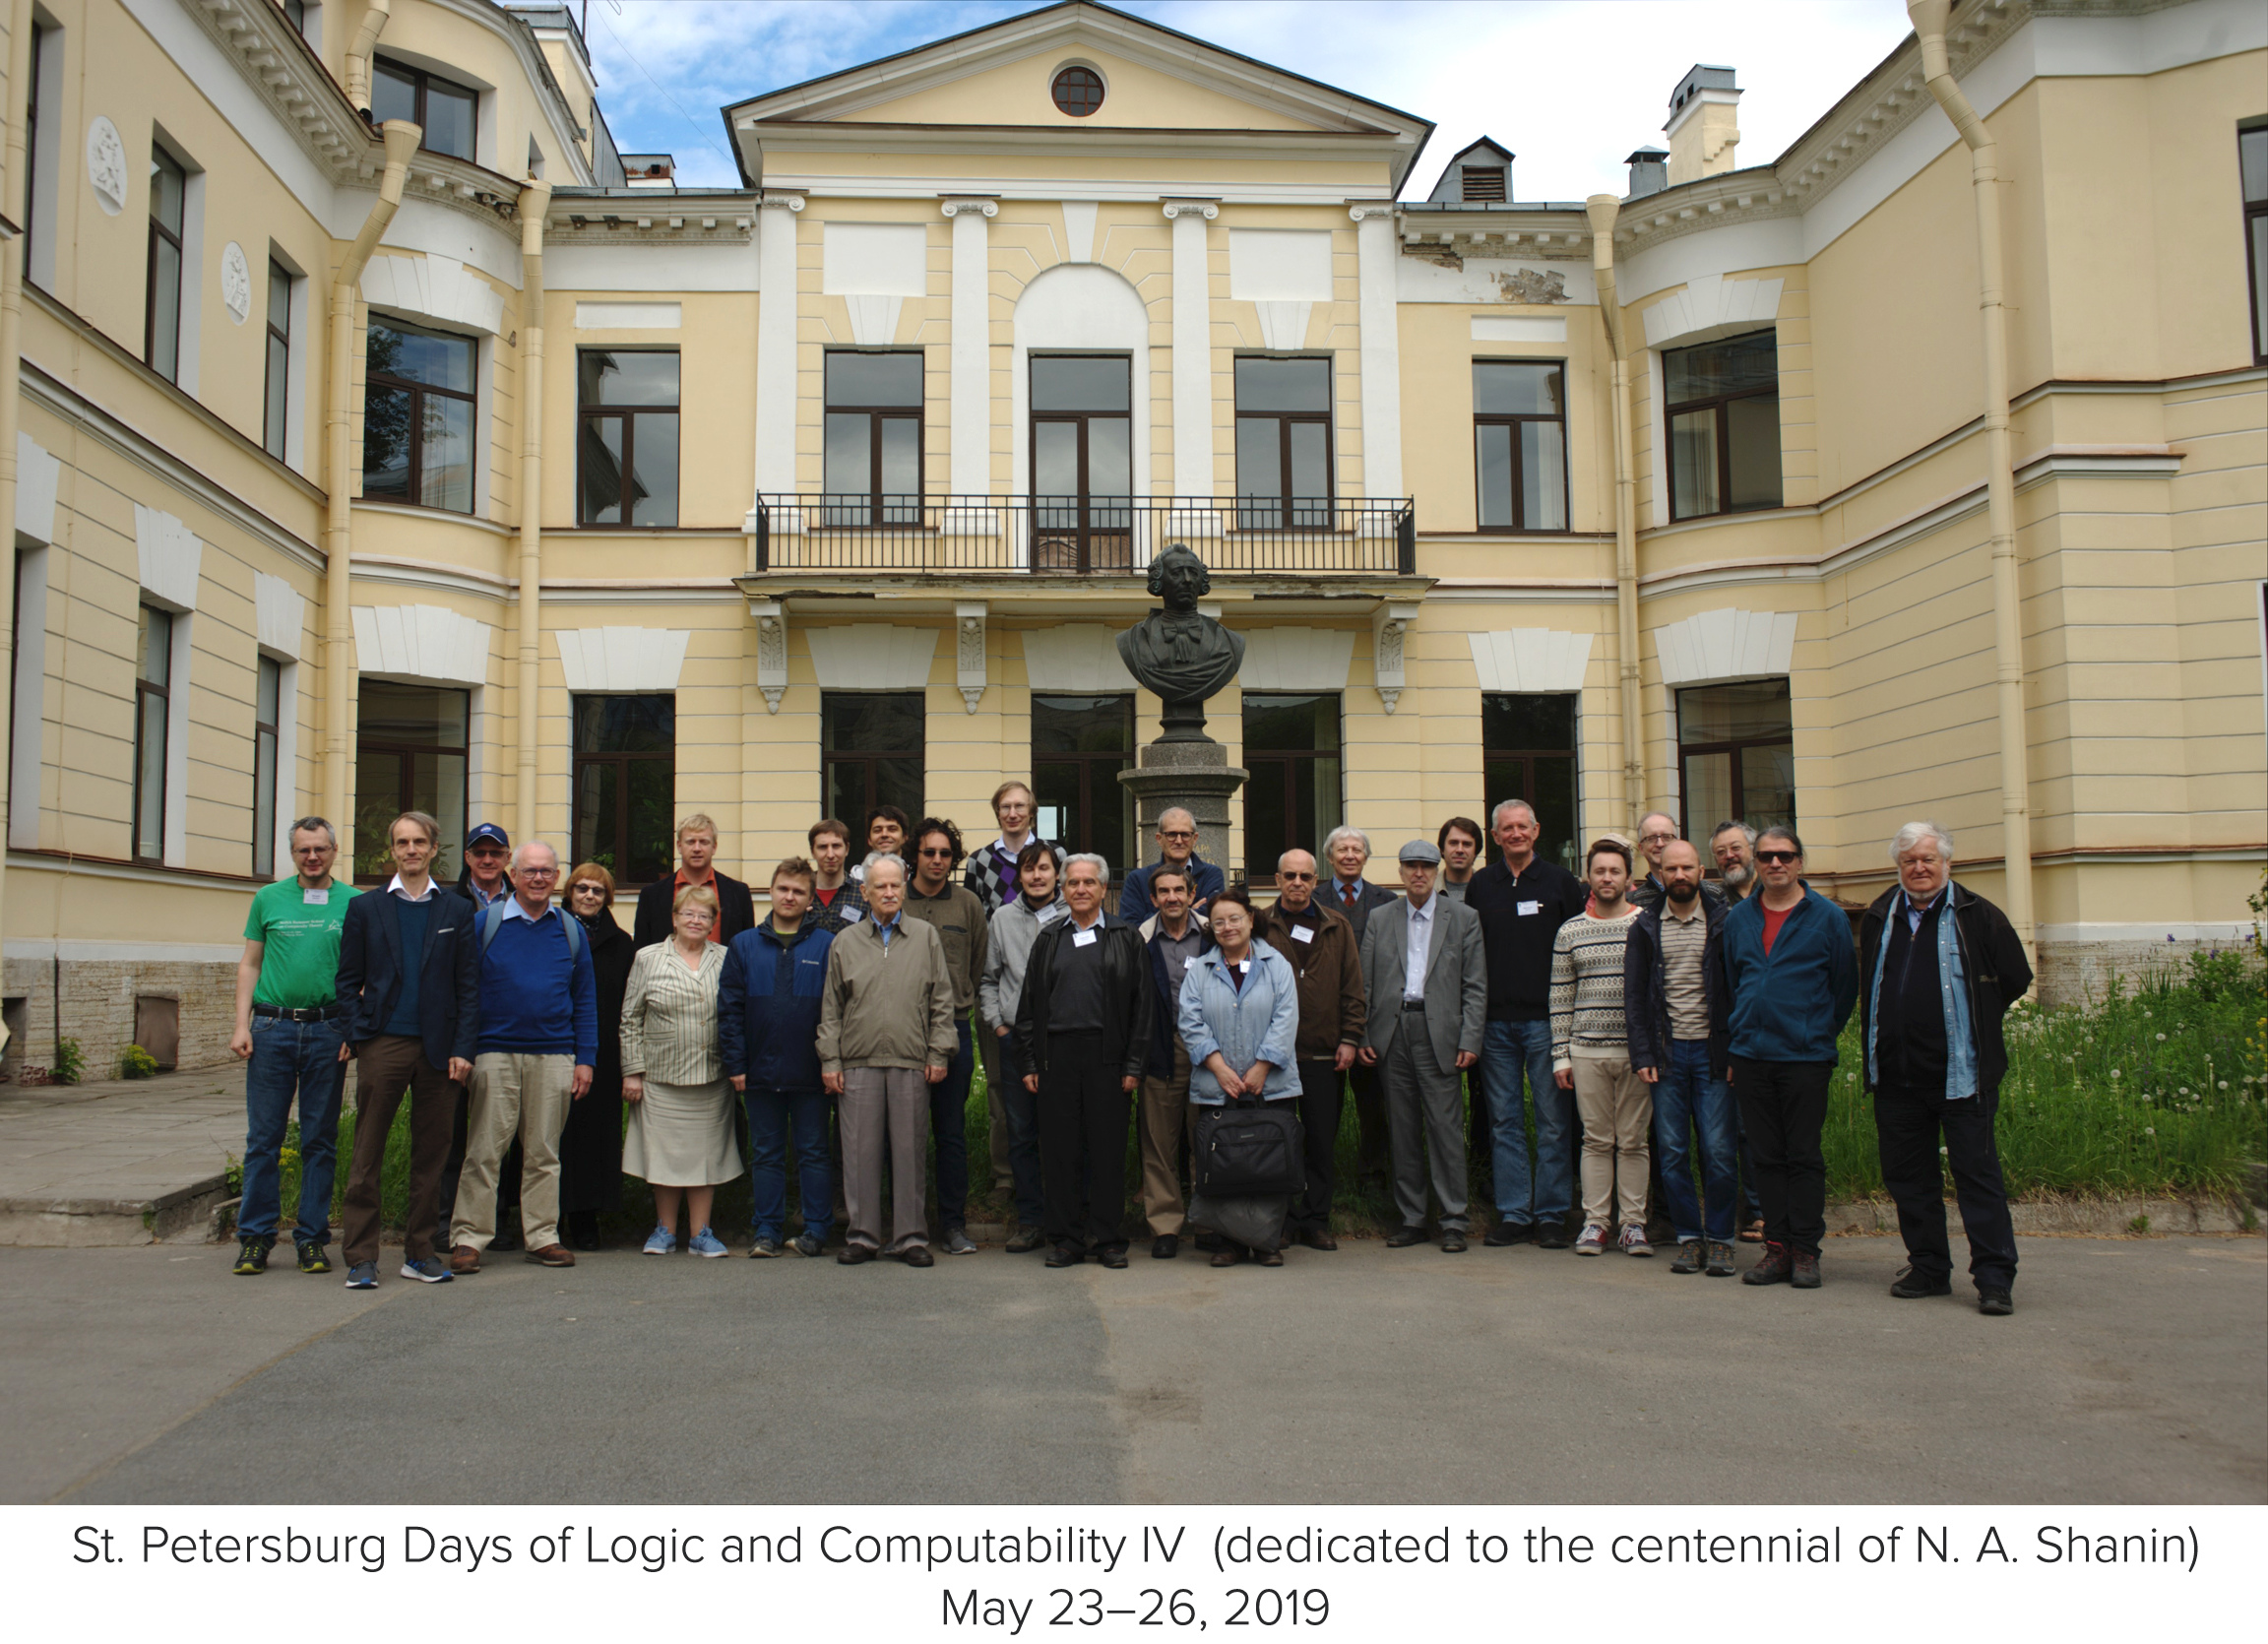 Photo of the participants of the conference taken on May 24, 2019